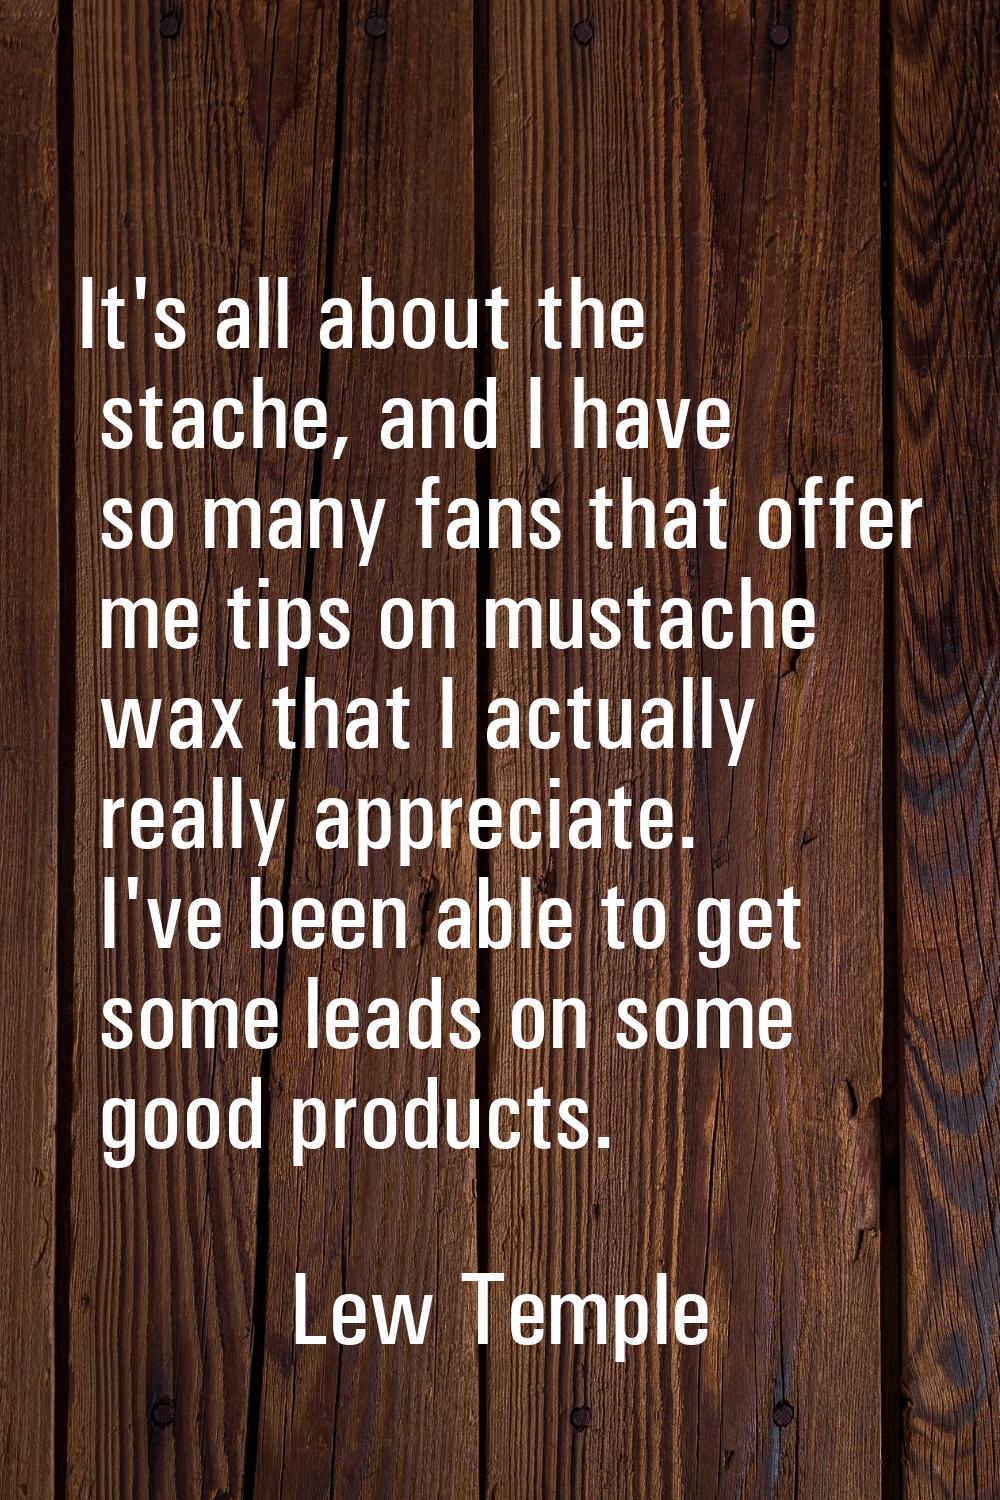 It's all about the stache, and I have so many fans that offer me tips on mustache wax that I actual